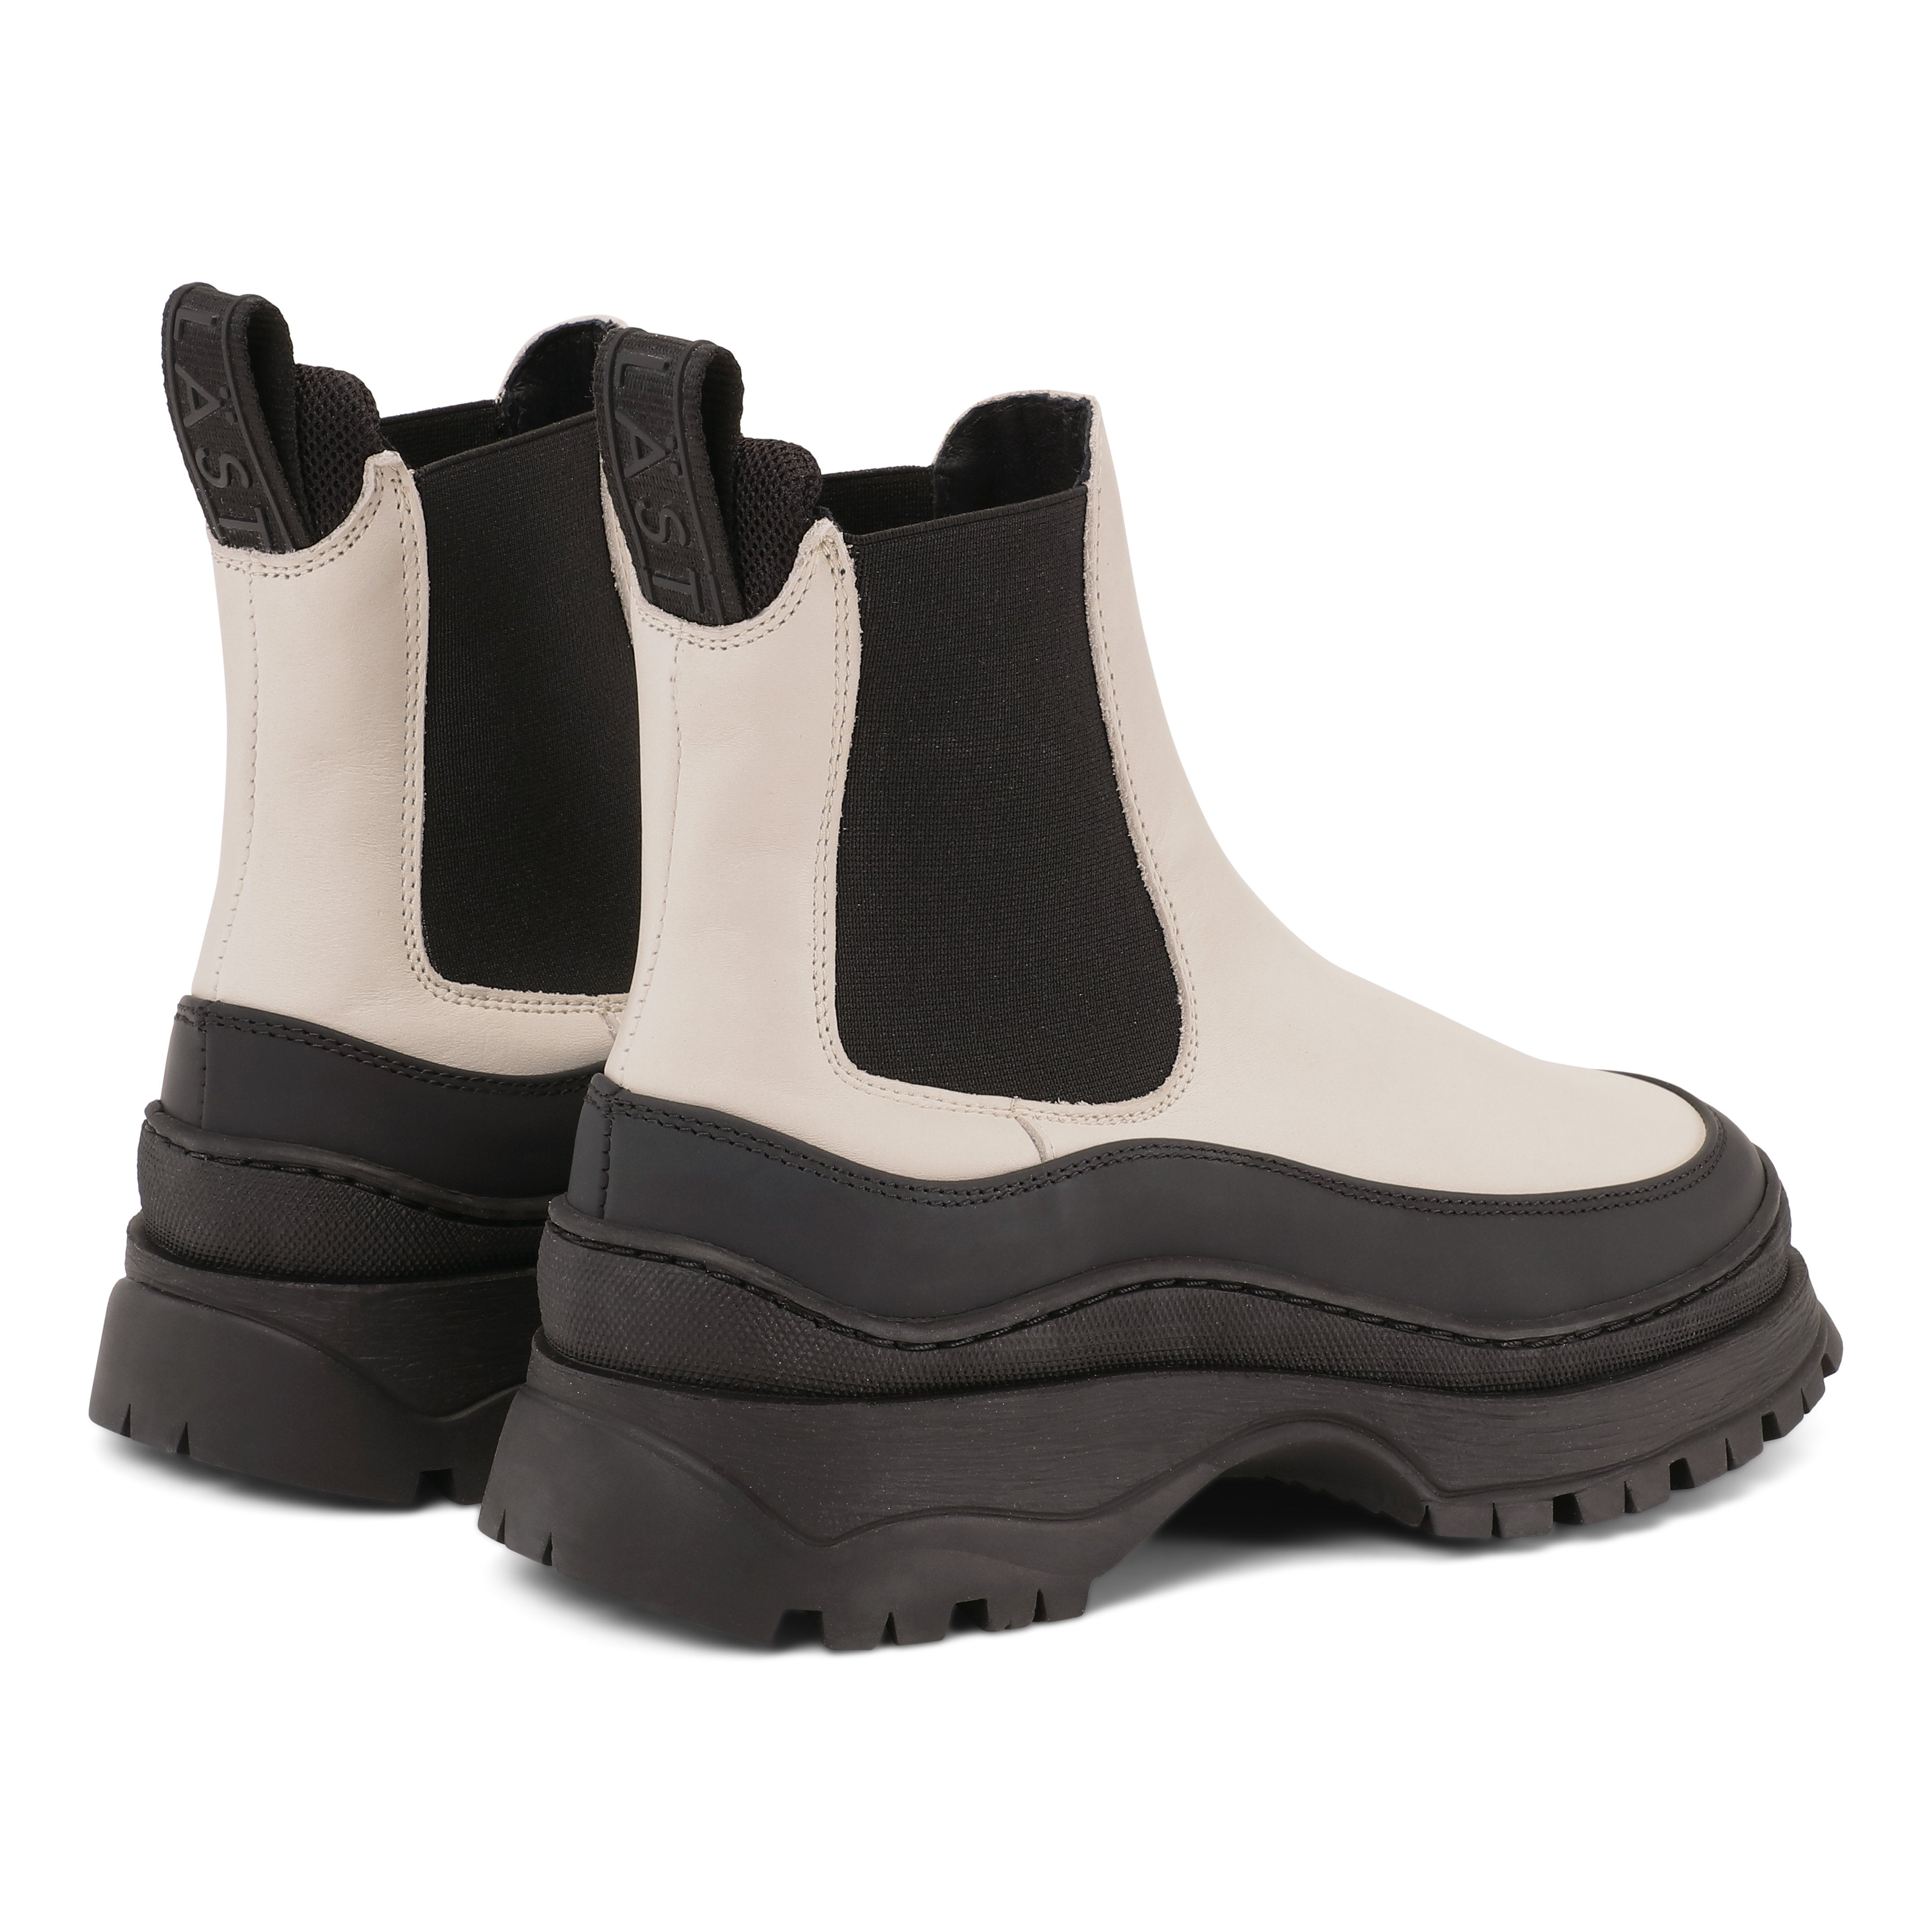 Trail Off White Chelsea Boots LAST1377 - 04